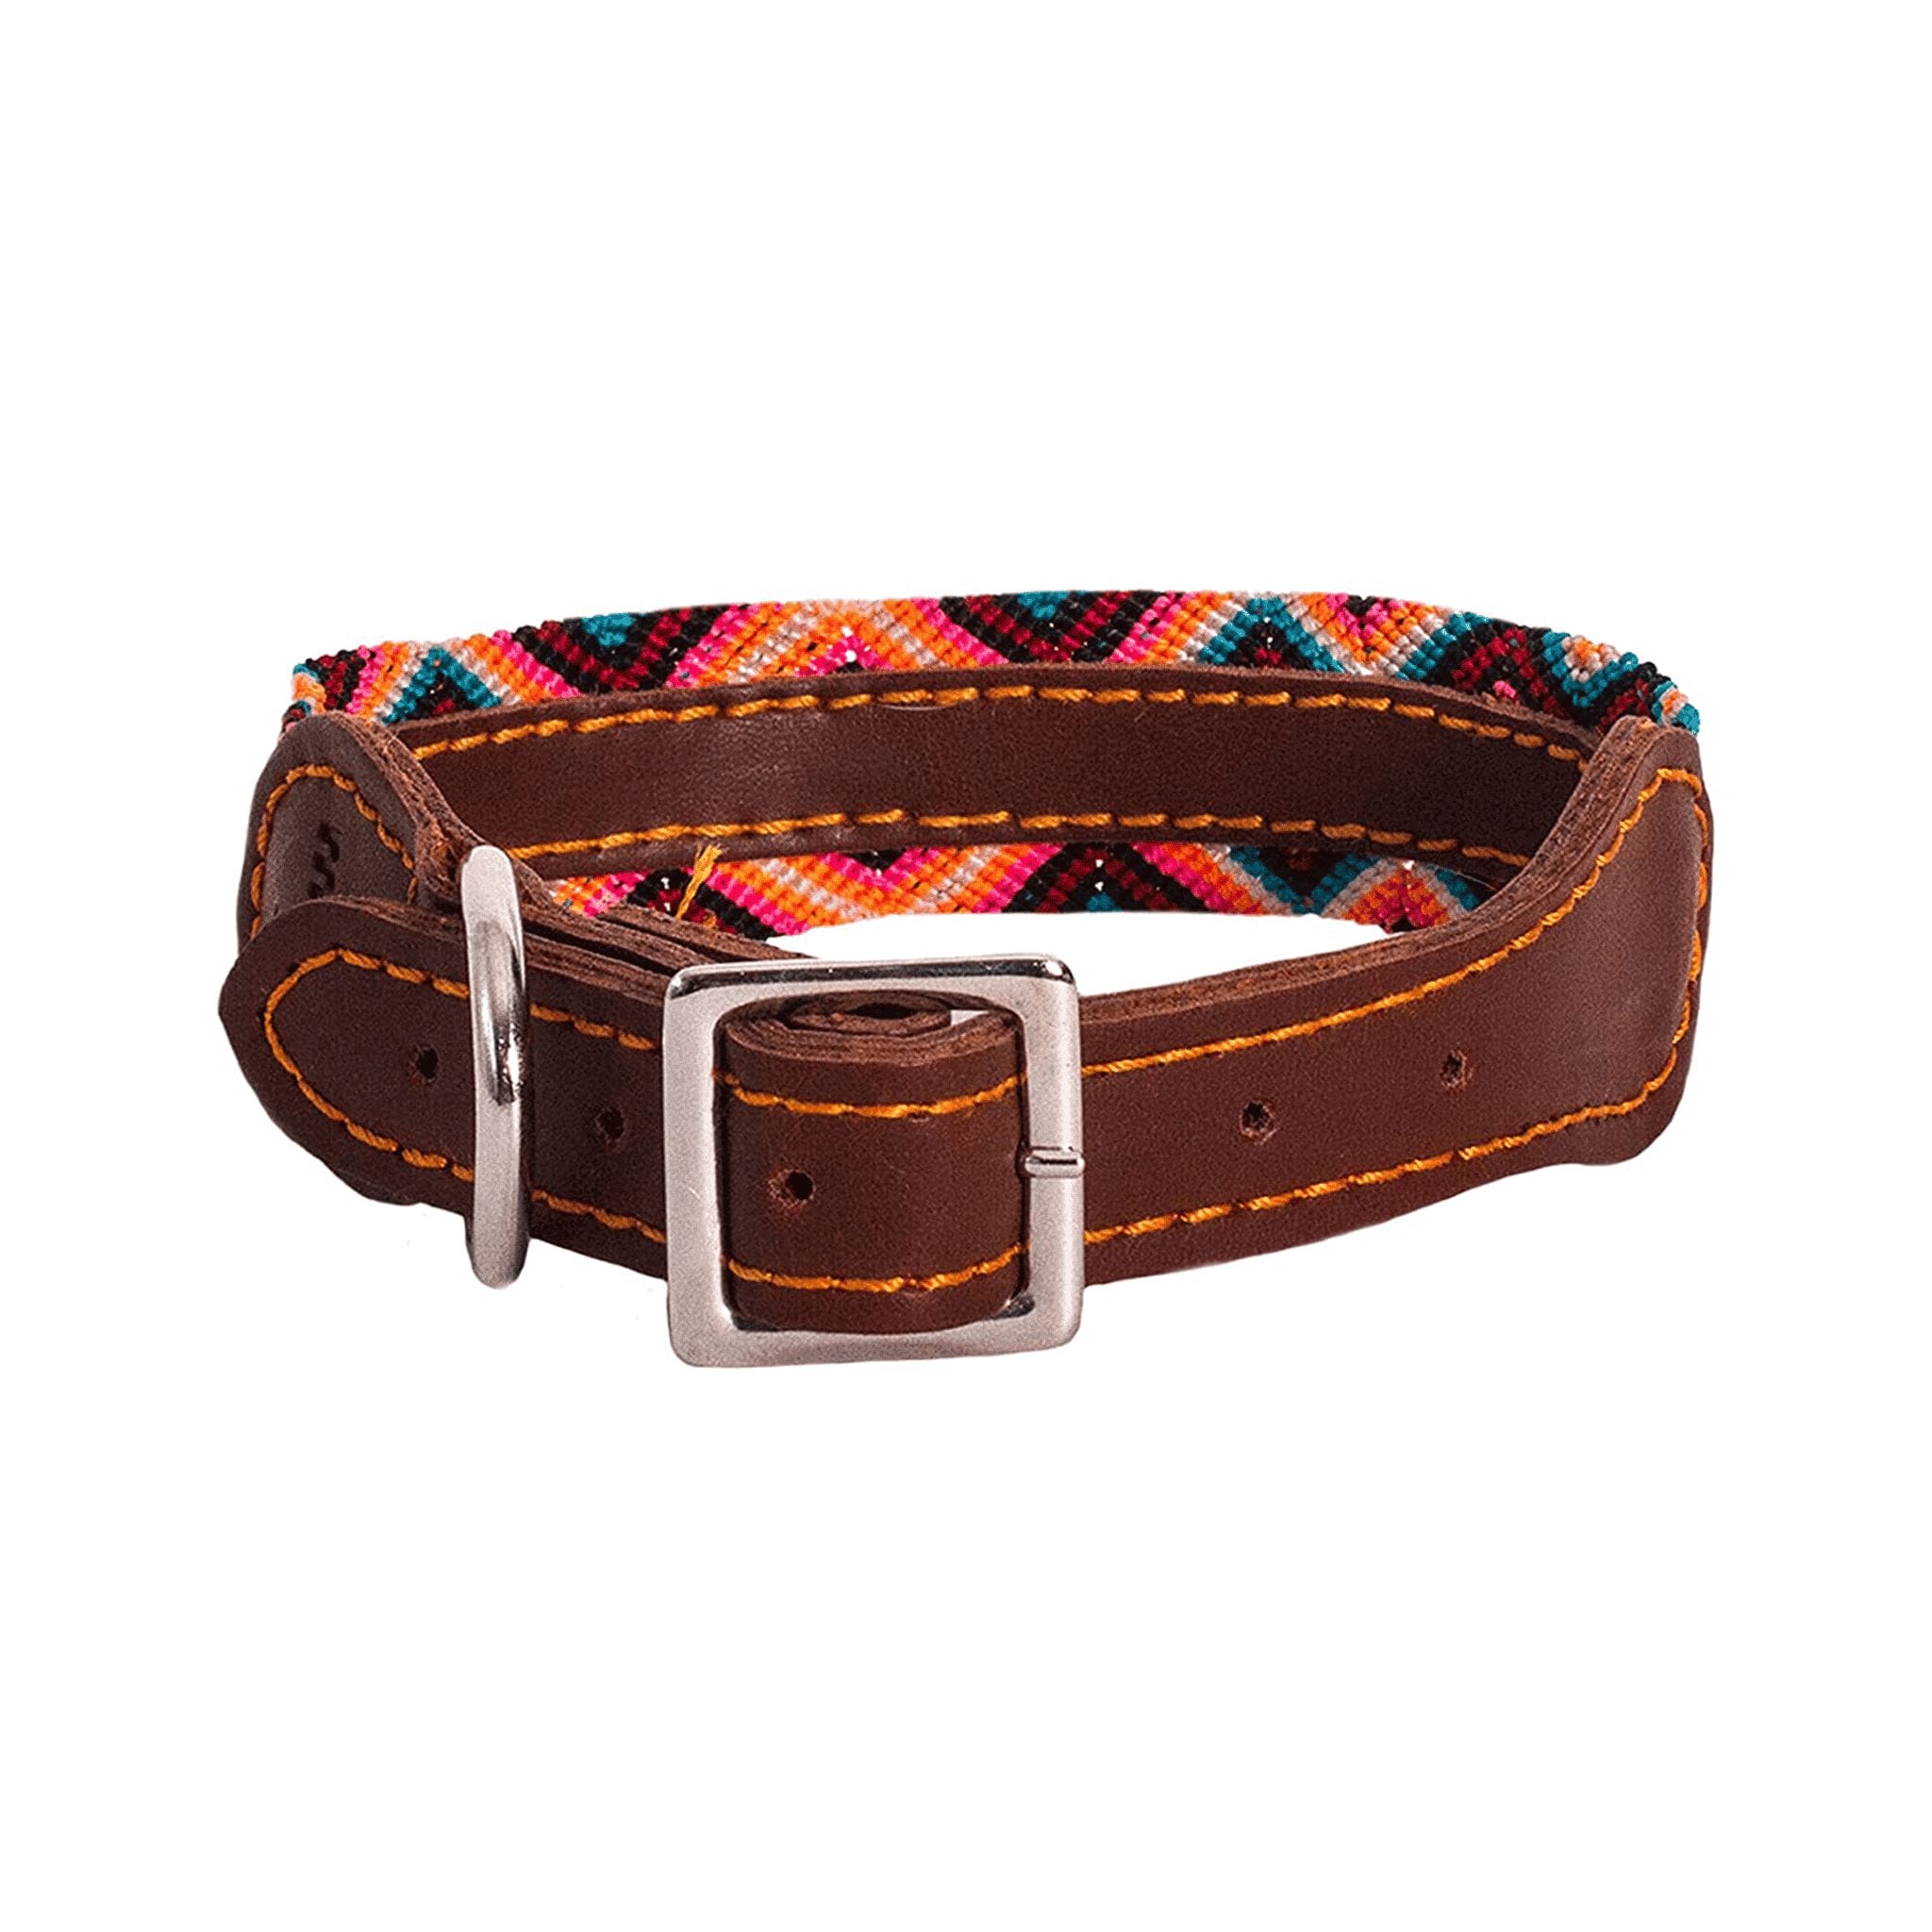 Moots Root Hand-Knitted Leather Pet Collar